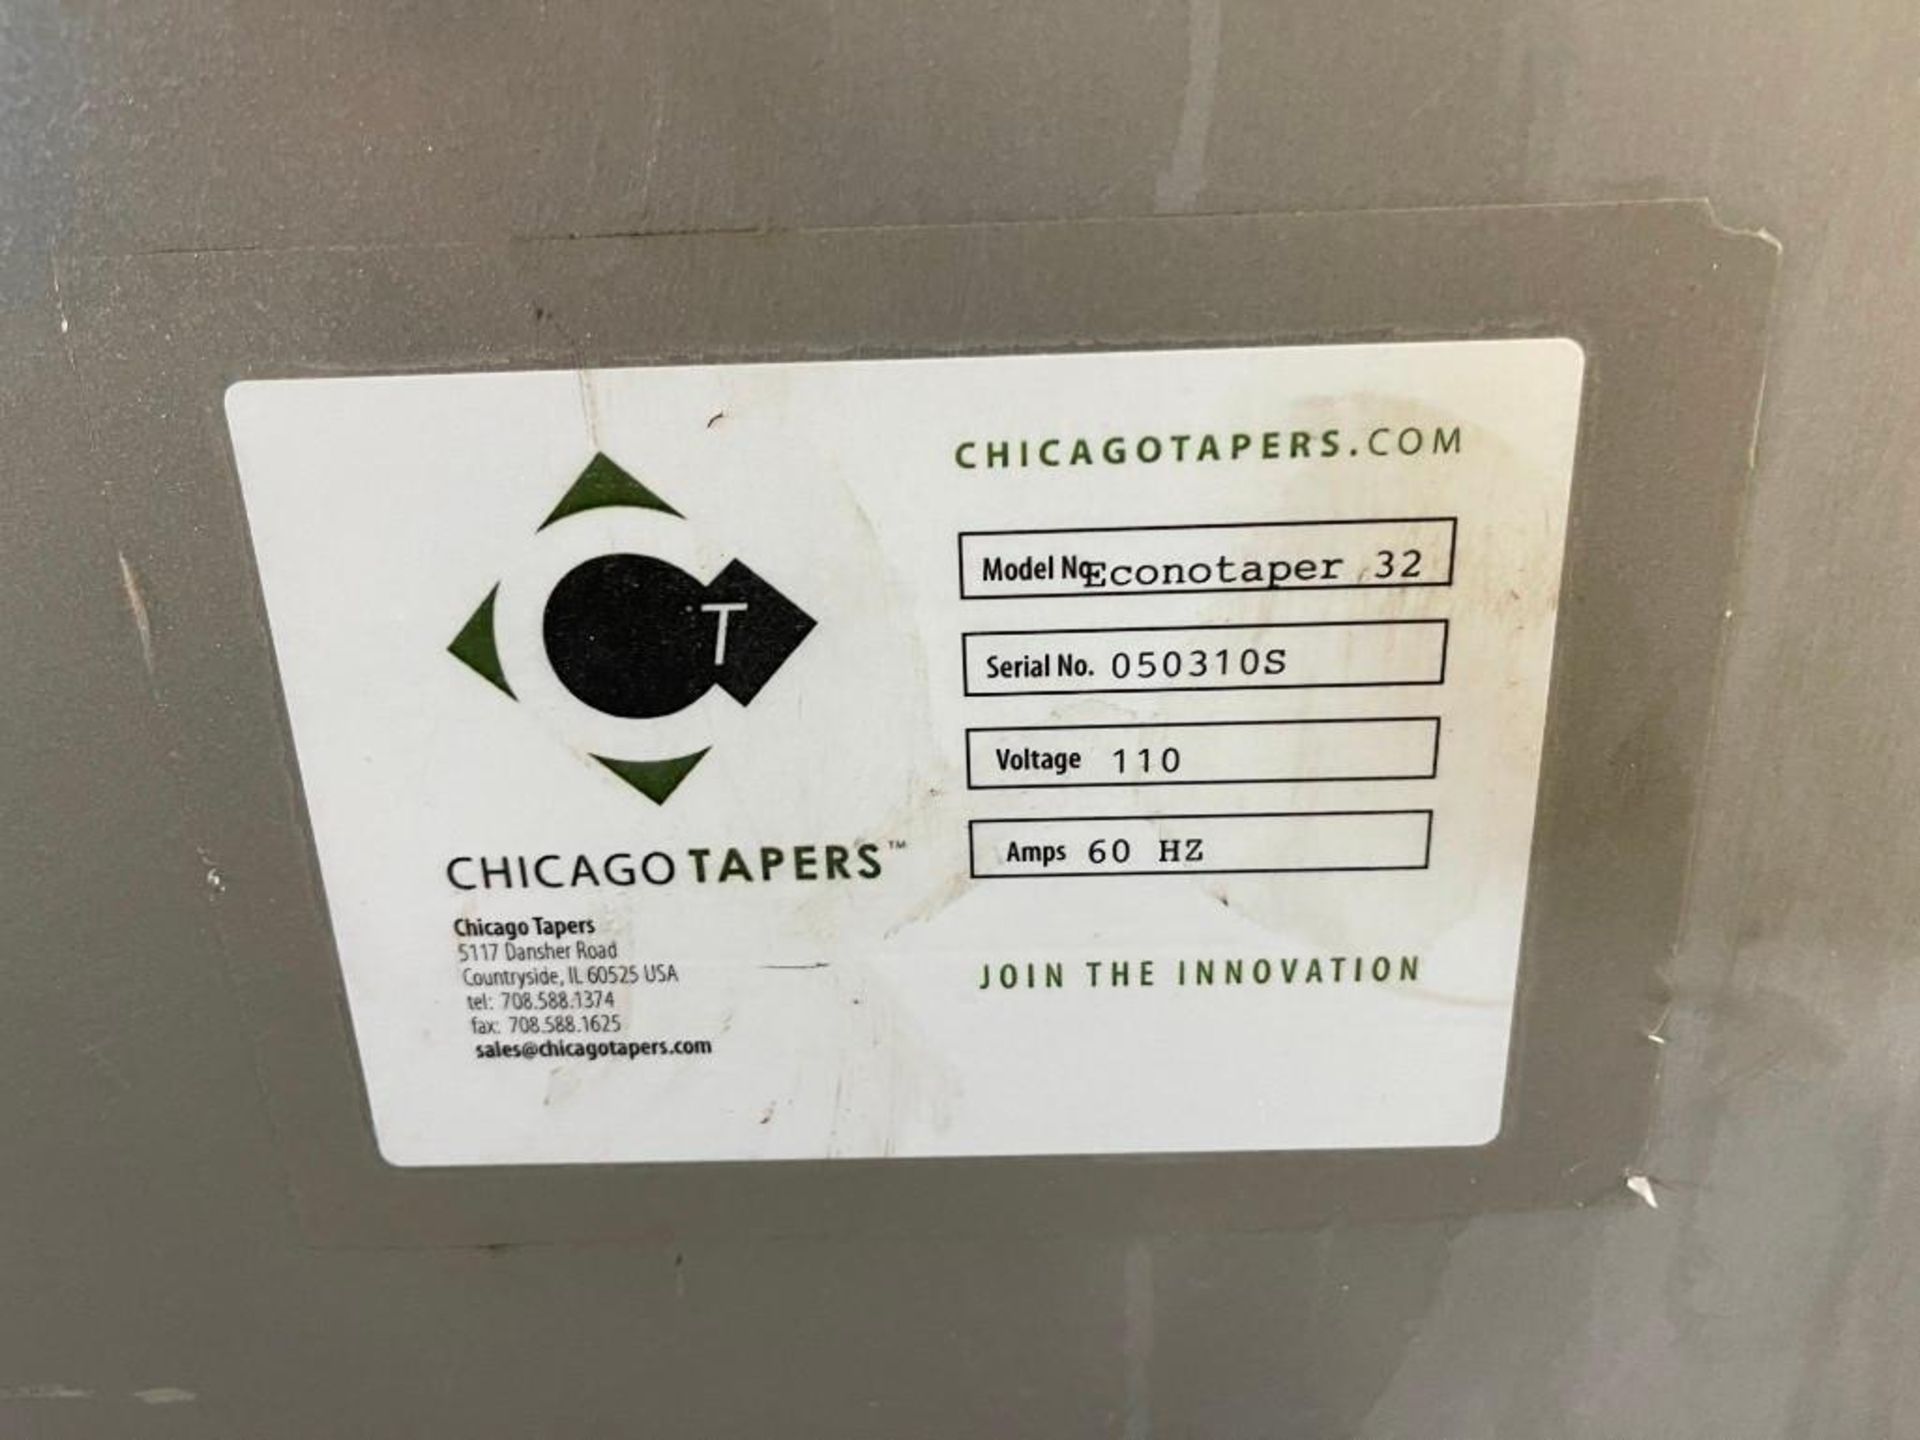 Chicago Tapers Case Sealer - Image 17 of 19